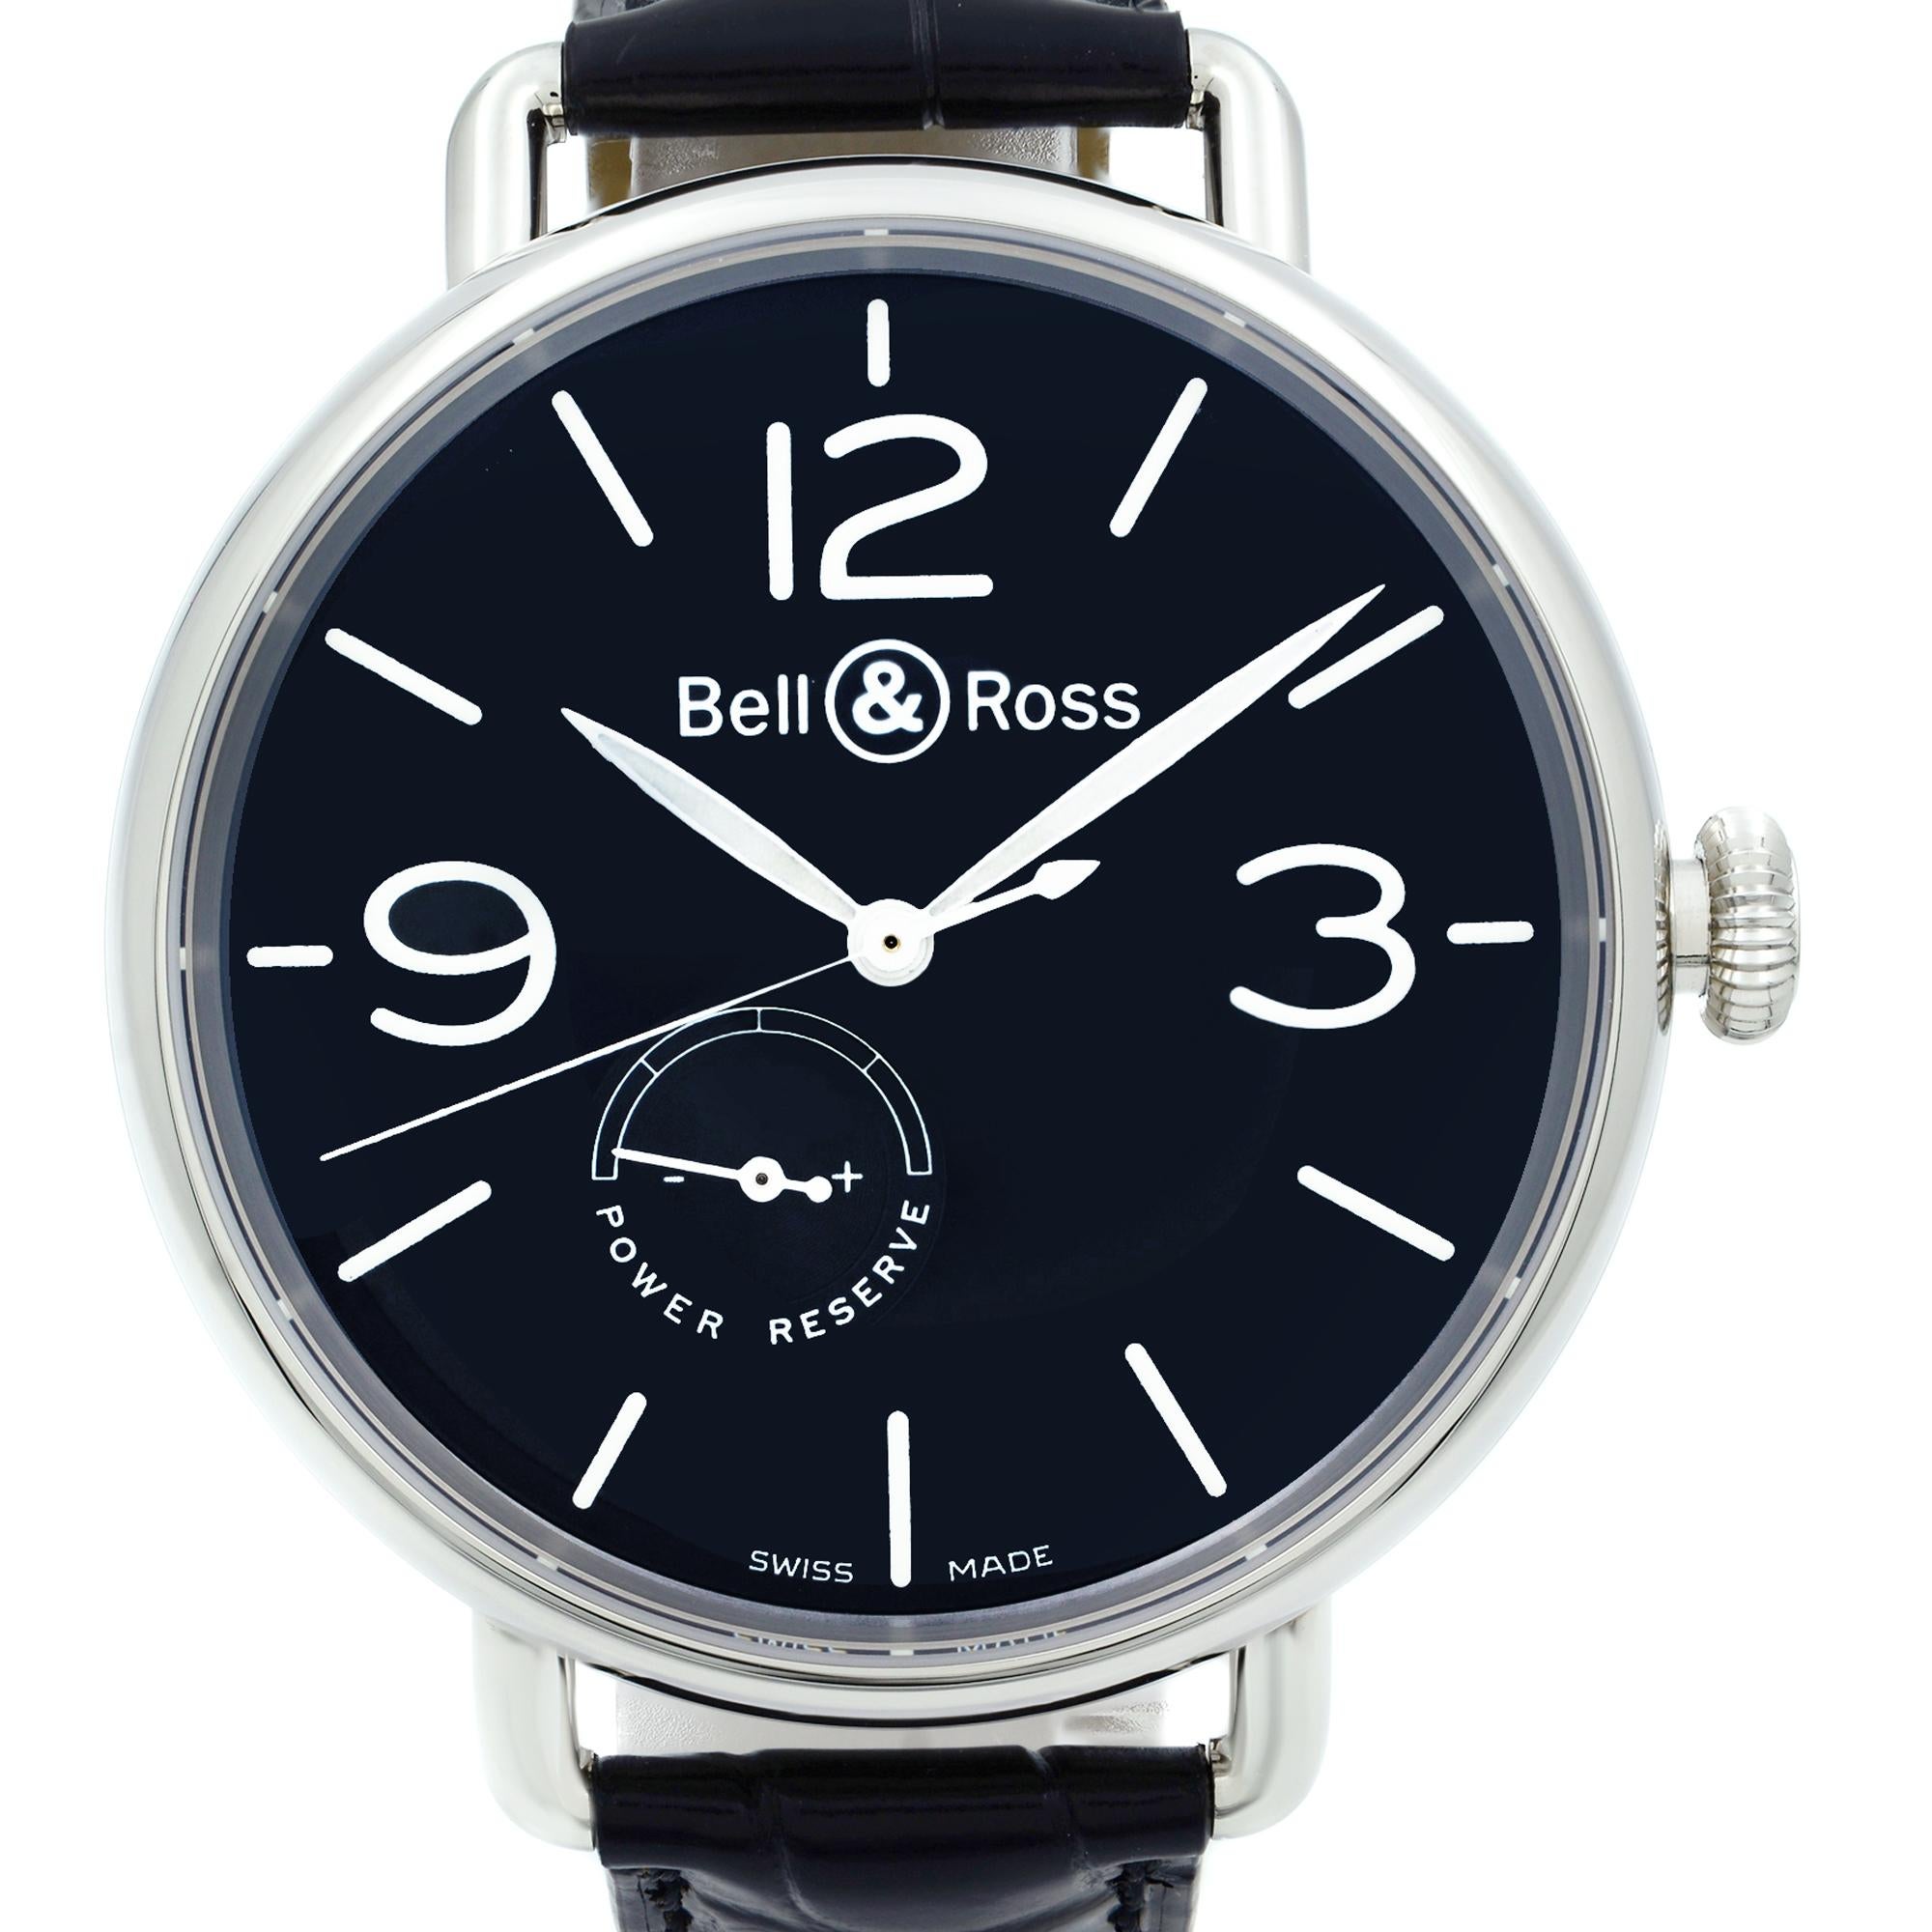 Brand New. Comes with Original Box and Papers. Covered By 3 Year Chronostore Warranty
MSRP 4500 
Brand Bell & Ross
Department Men
Model Number BRWW197-BL-ST/SCR Model
Bell & Ross WW1
Style Classic, Dress/Formal, Luxury
Band Color Black
Dial Color